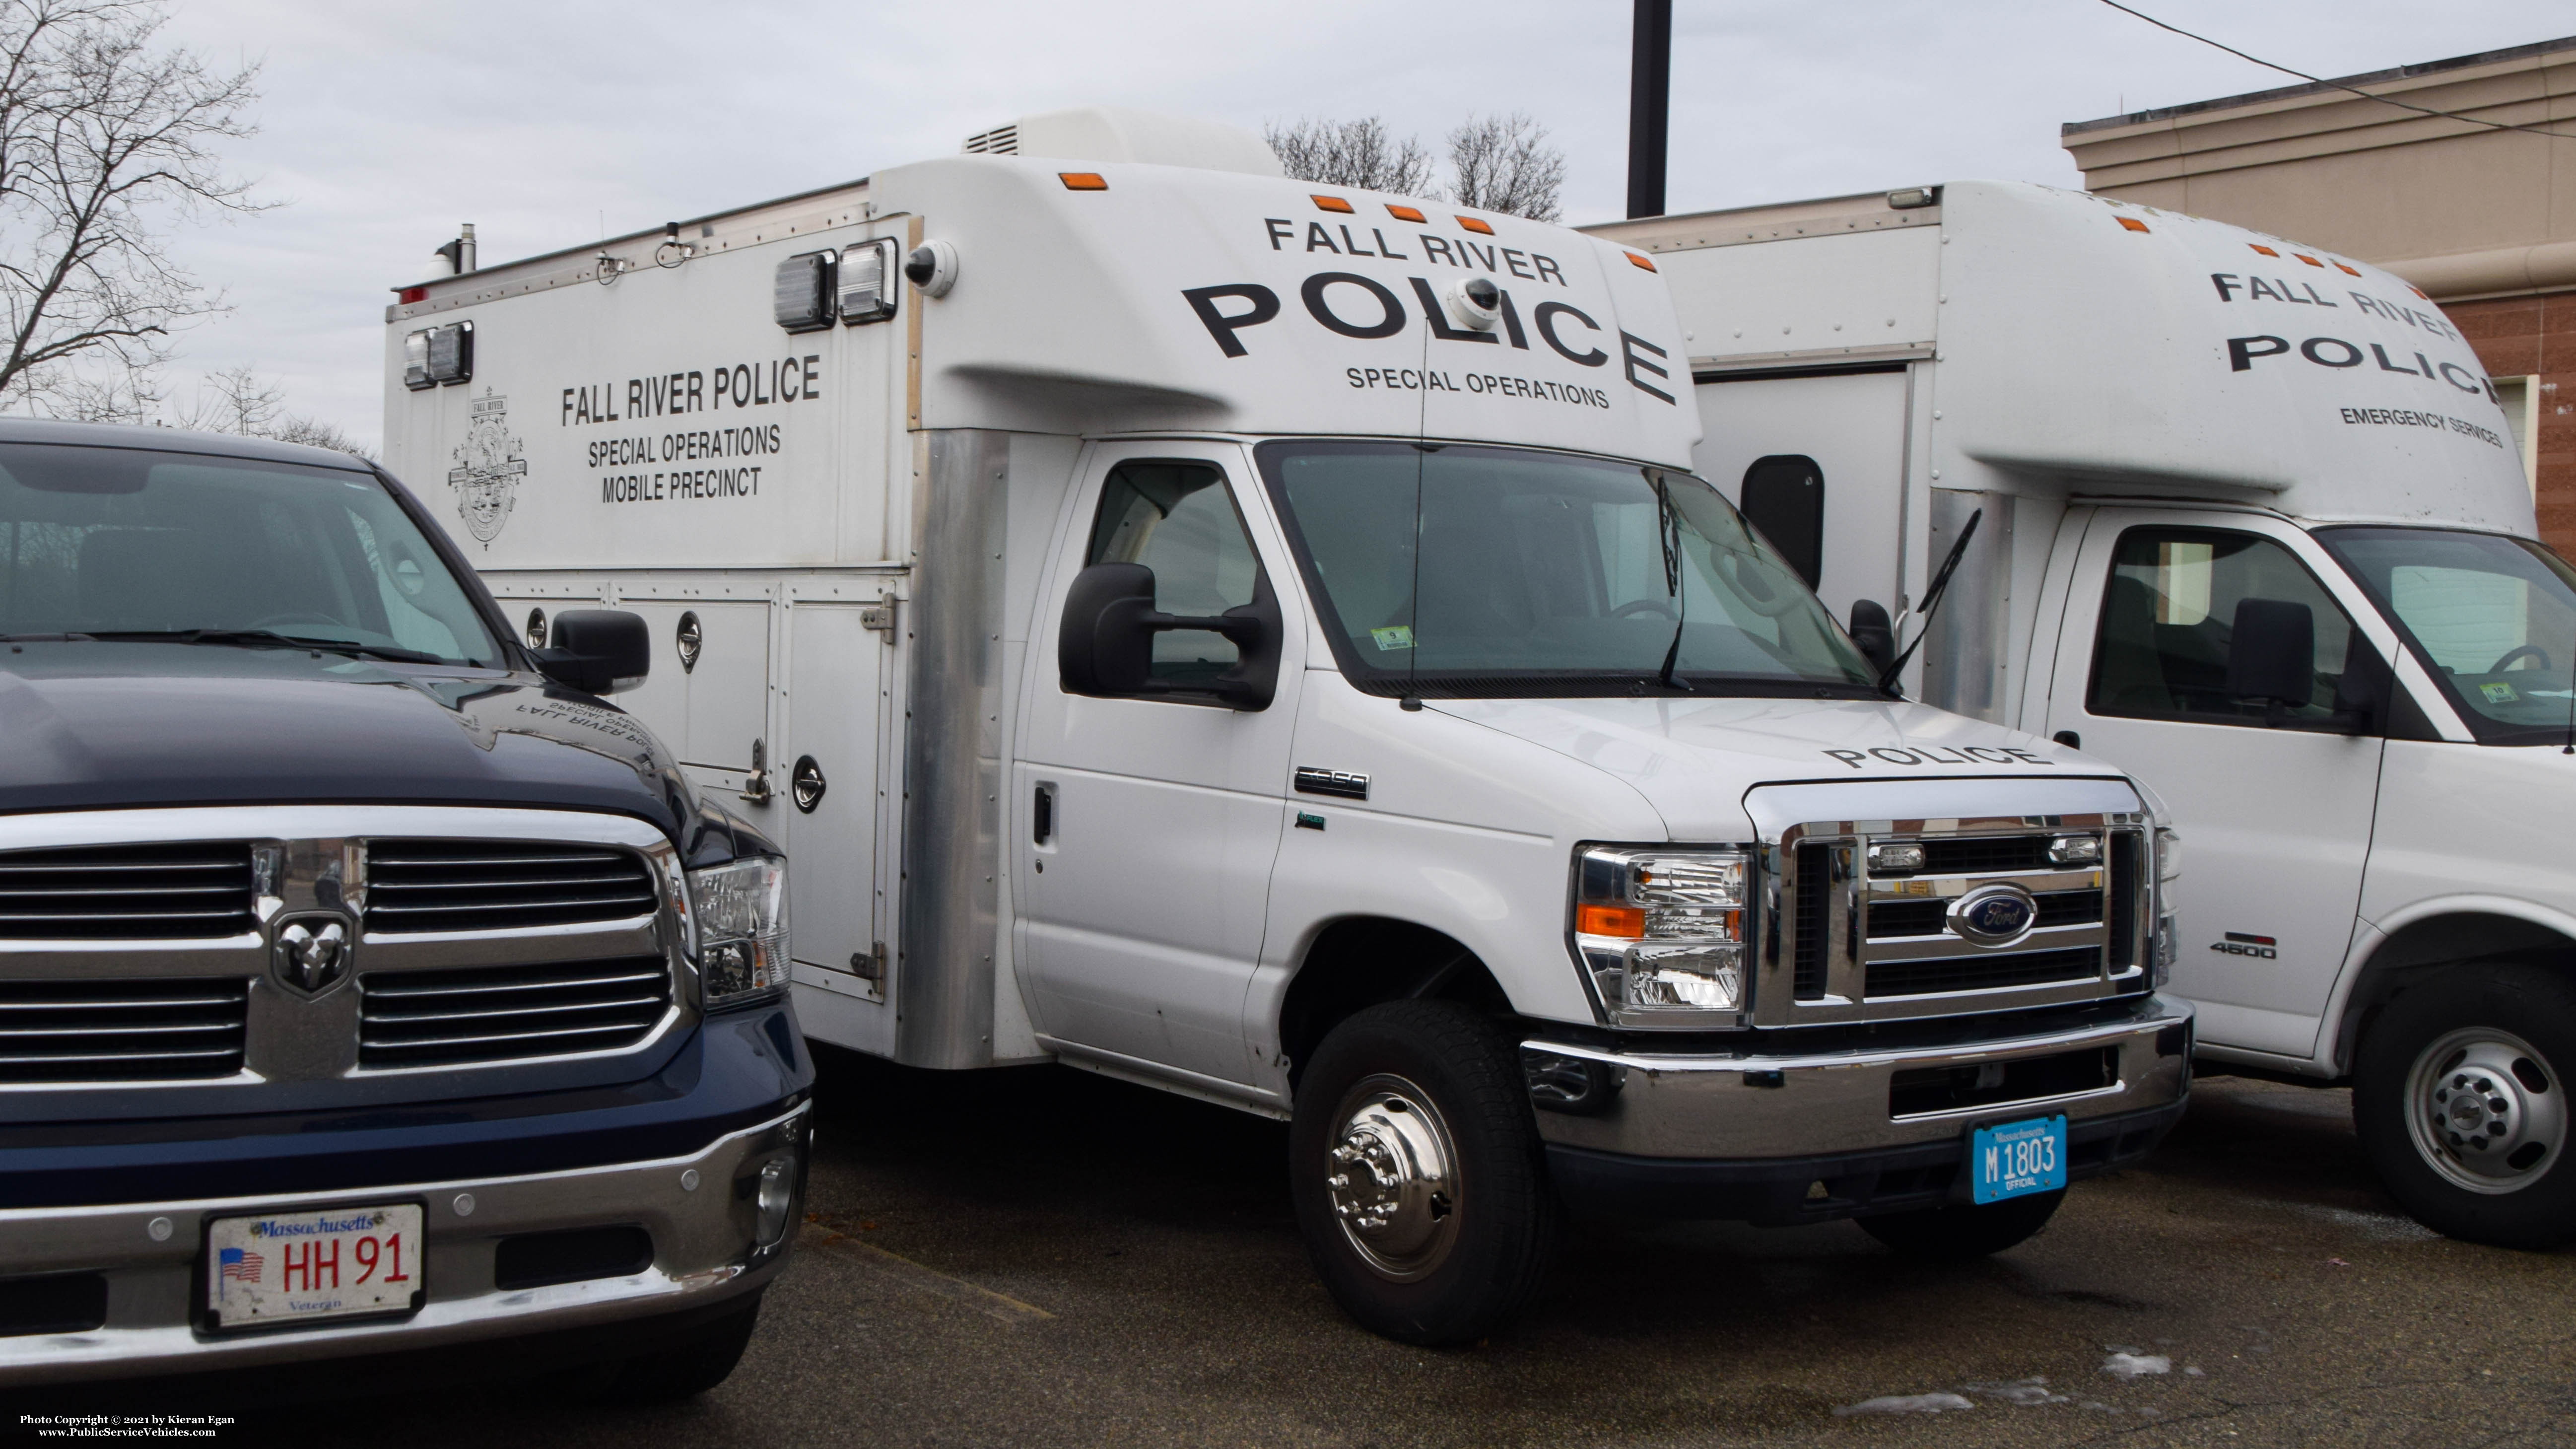 A photo  of Fall River Police
            Special Operations Mobile Precinct Unit, a 2014 Ford E-350             taken by Kieran Egan